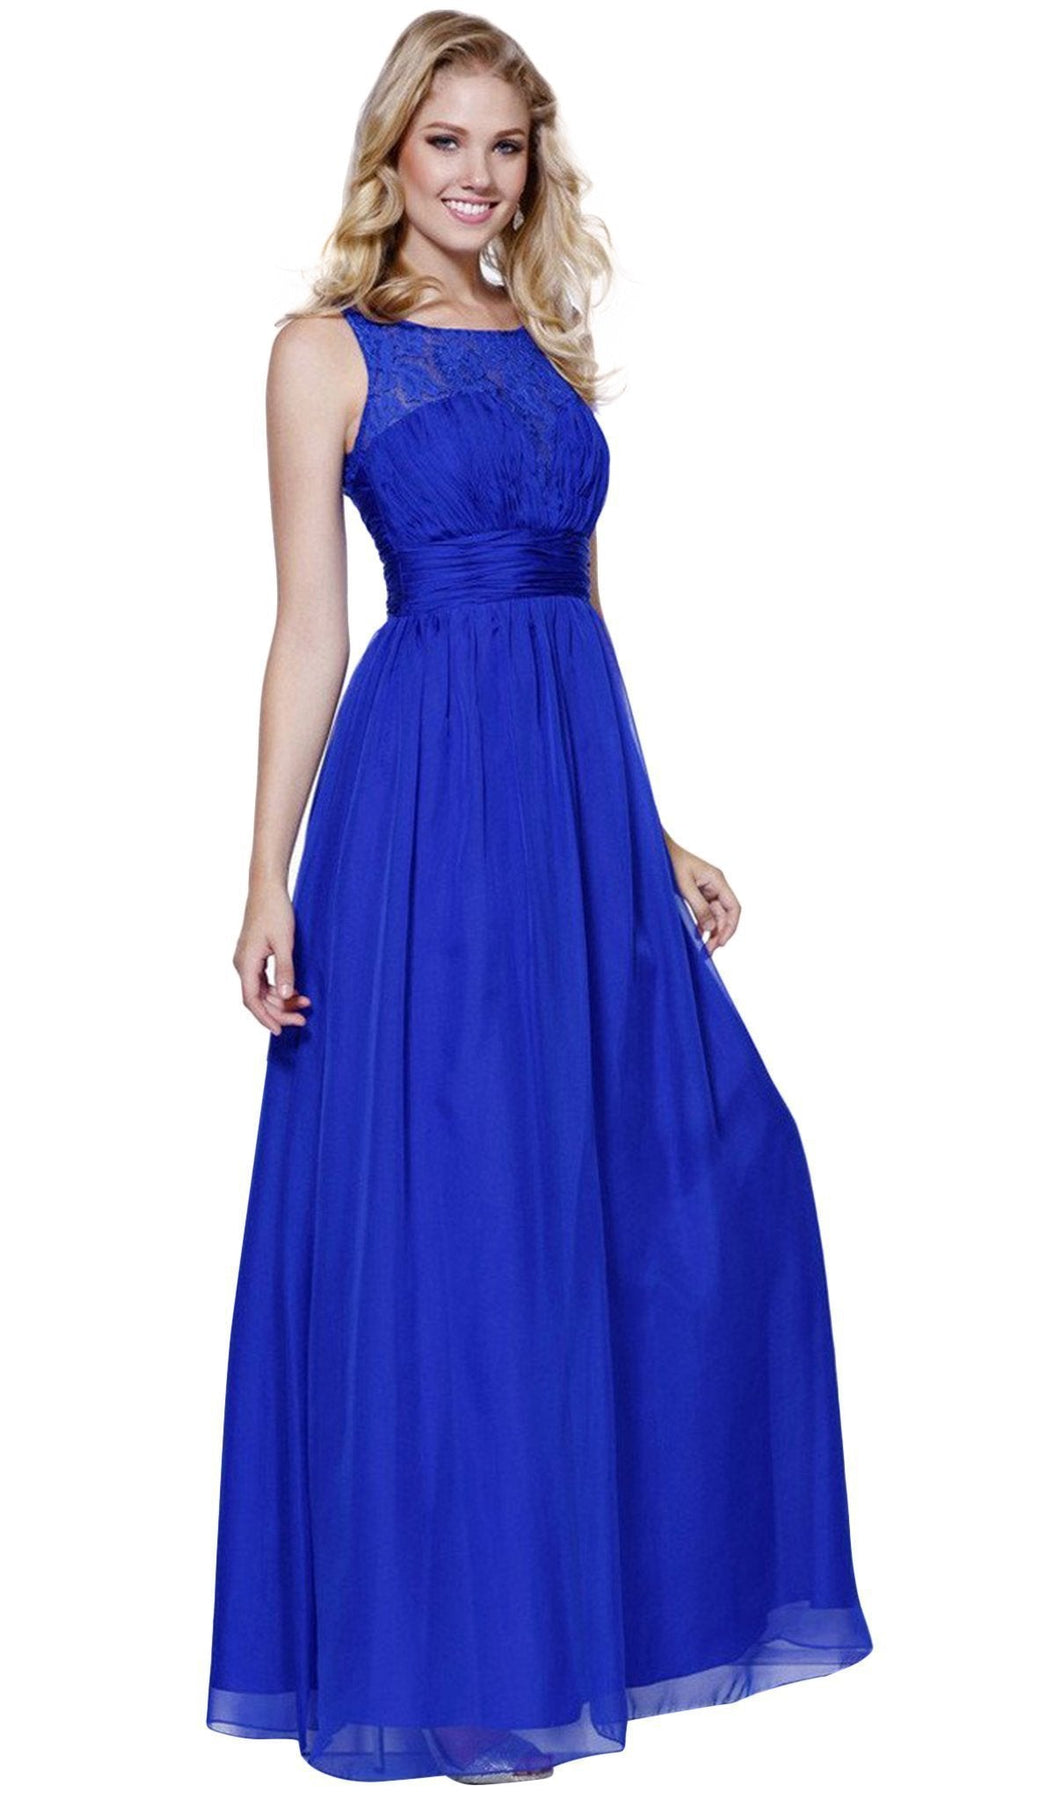 Nox Anabel - 7126 Sleeveless Lace and Chiffon A-Line Evening Dress Special Occasion Dress XS / Royal Blue